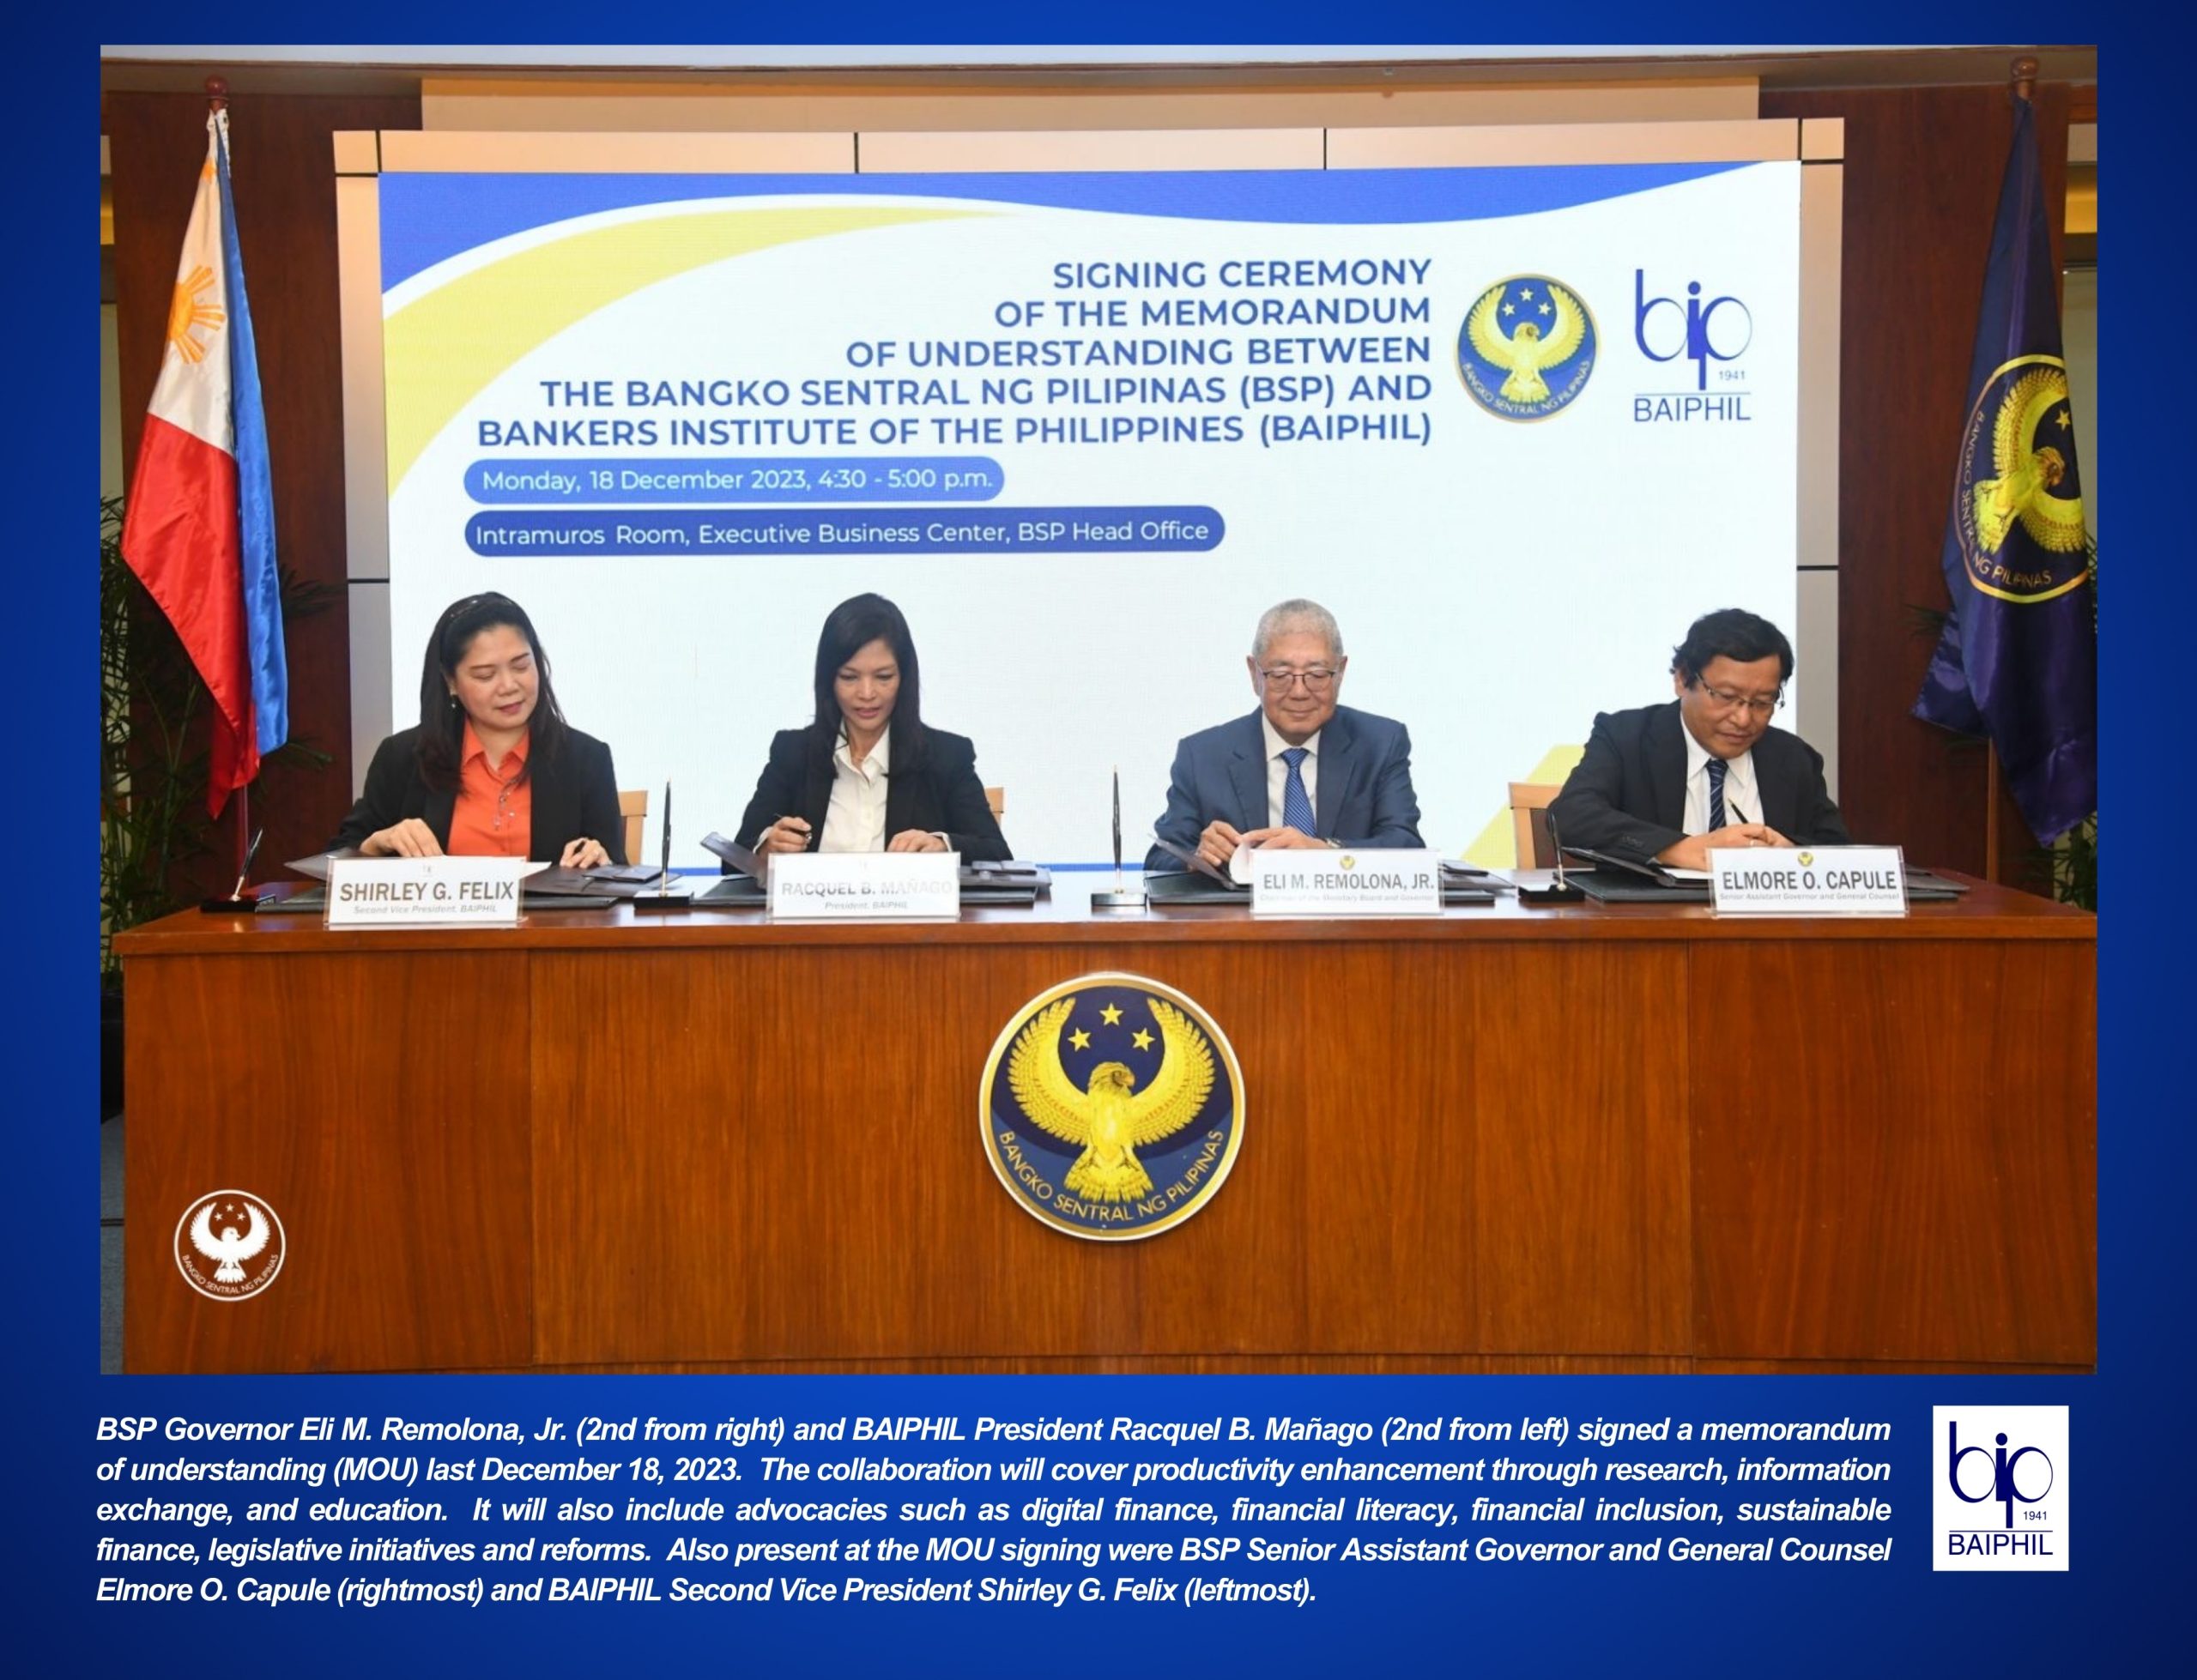 Signing Ceremony of the Memorandum of Understanding Between the Bangko Sentral ng Pilipinas (BSP) and Bankers Institute of the Philippines, Inc. (BAIPHIL)